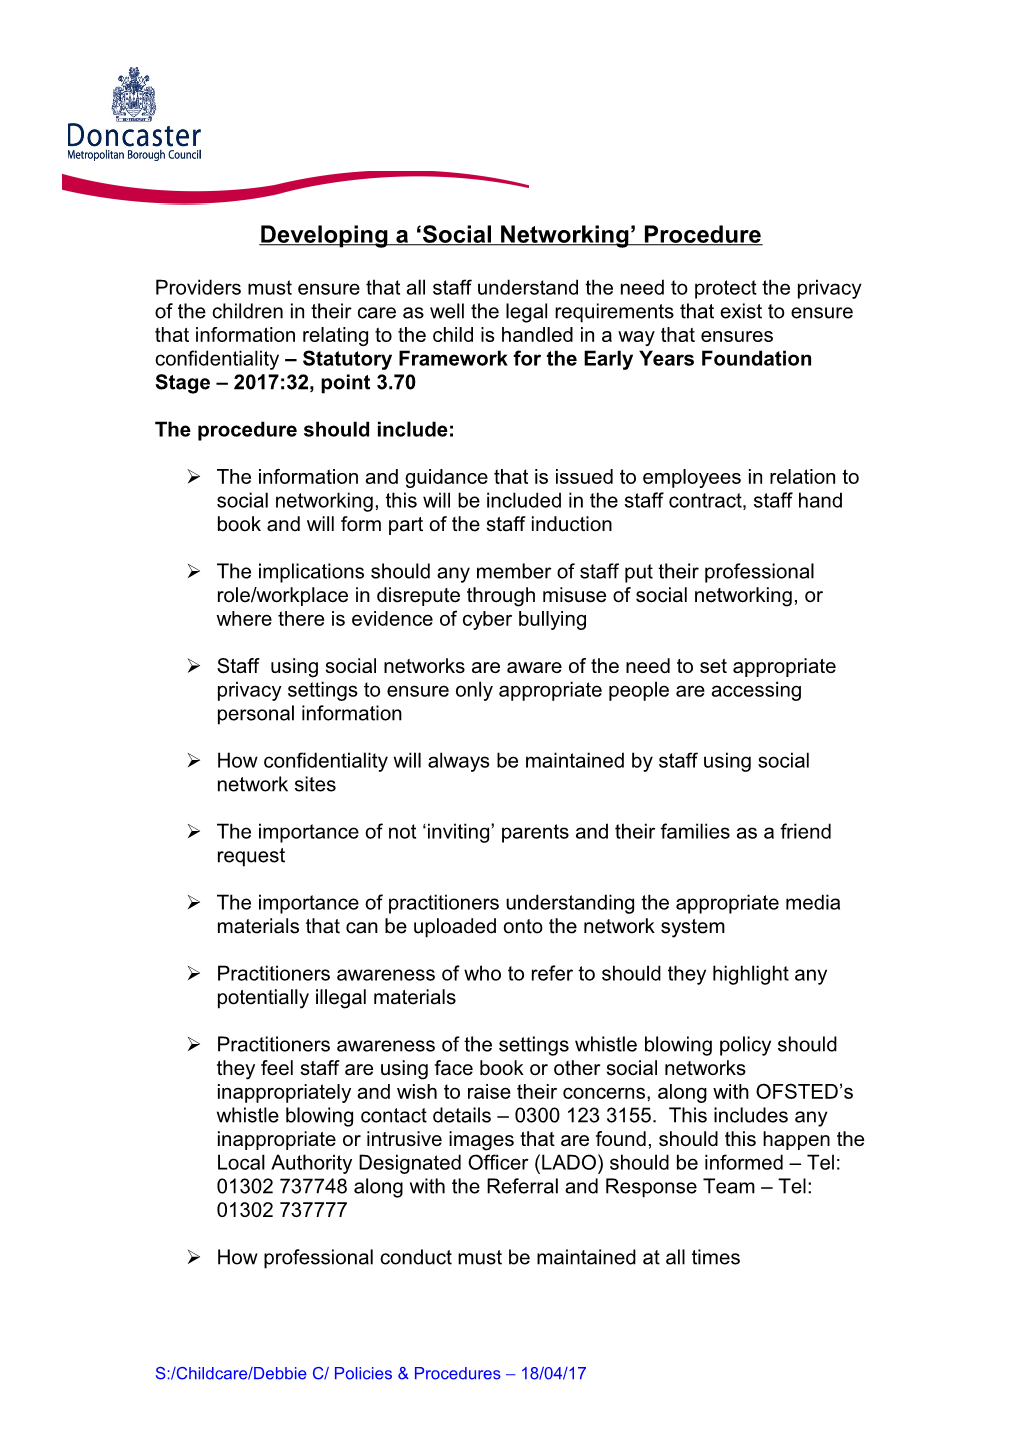 Developing a Social Networking Procedure